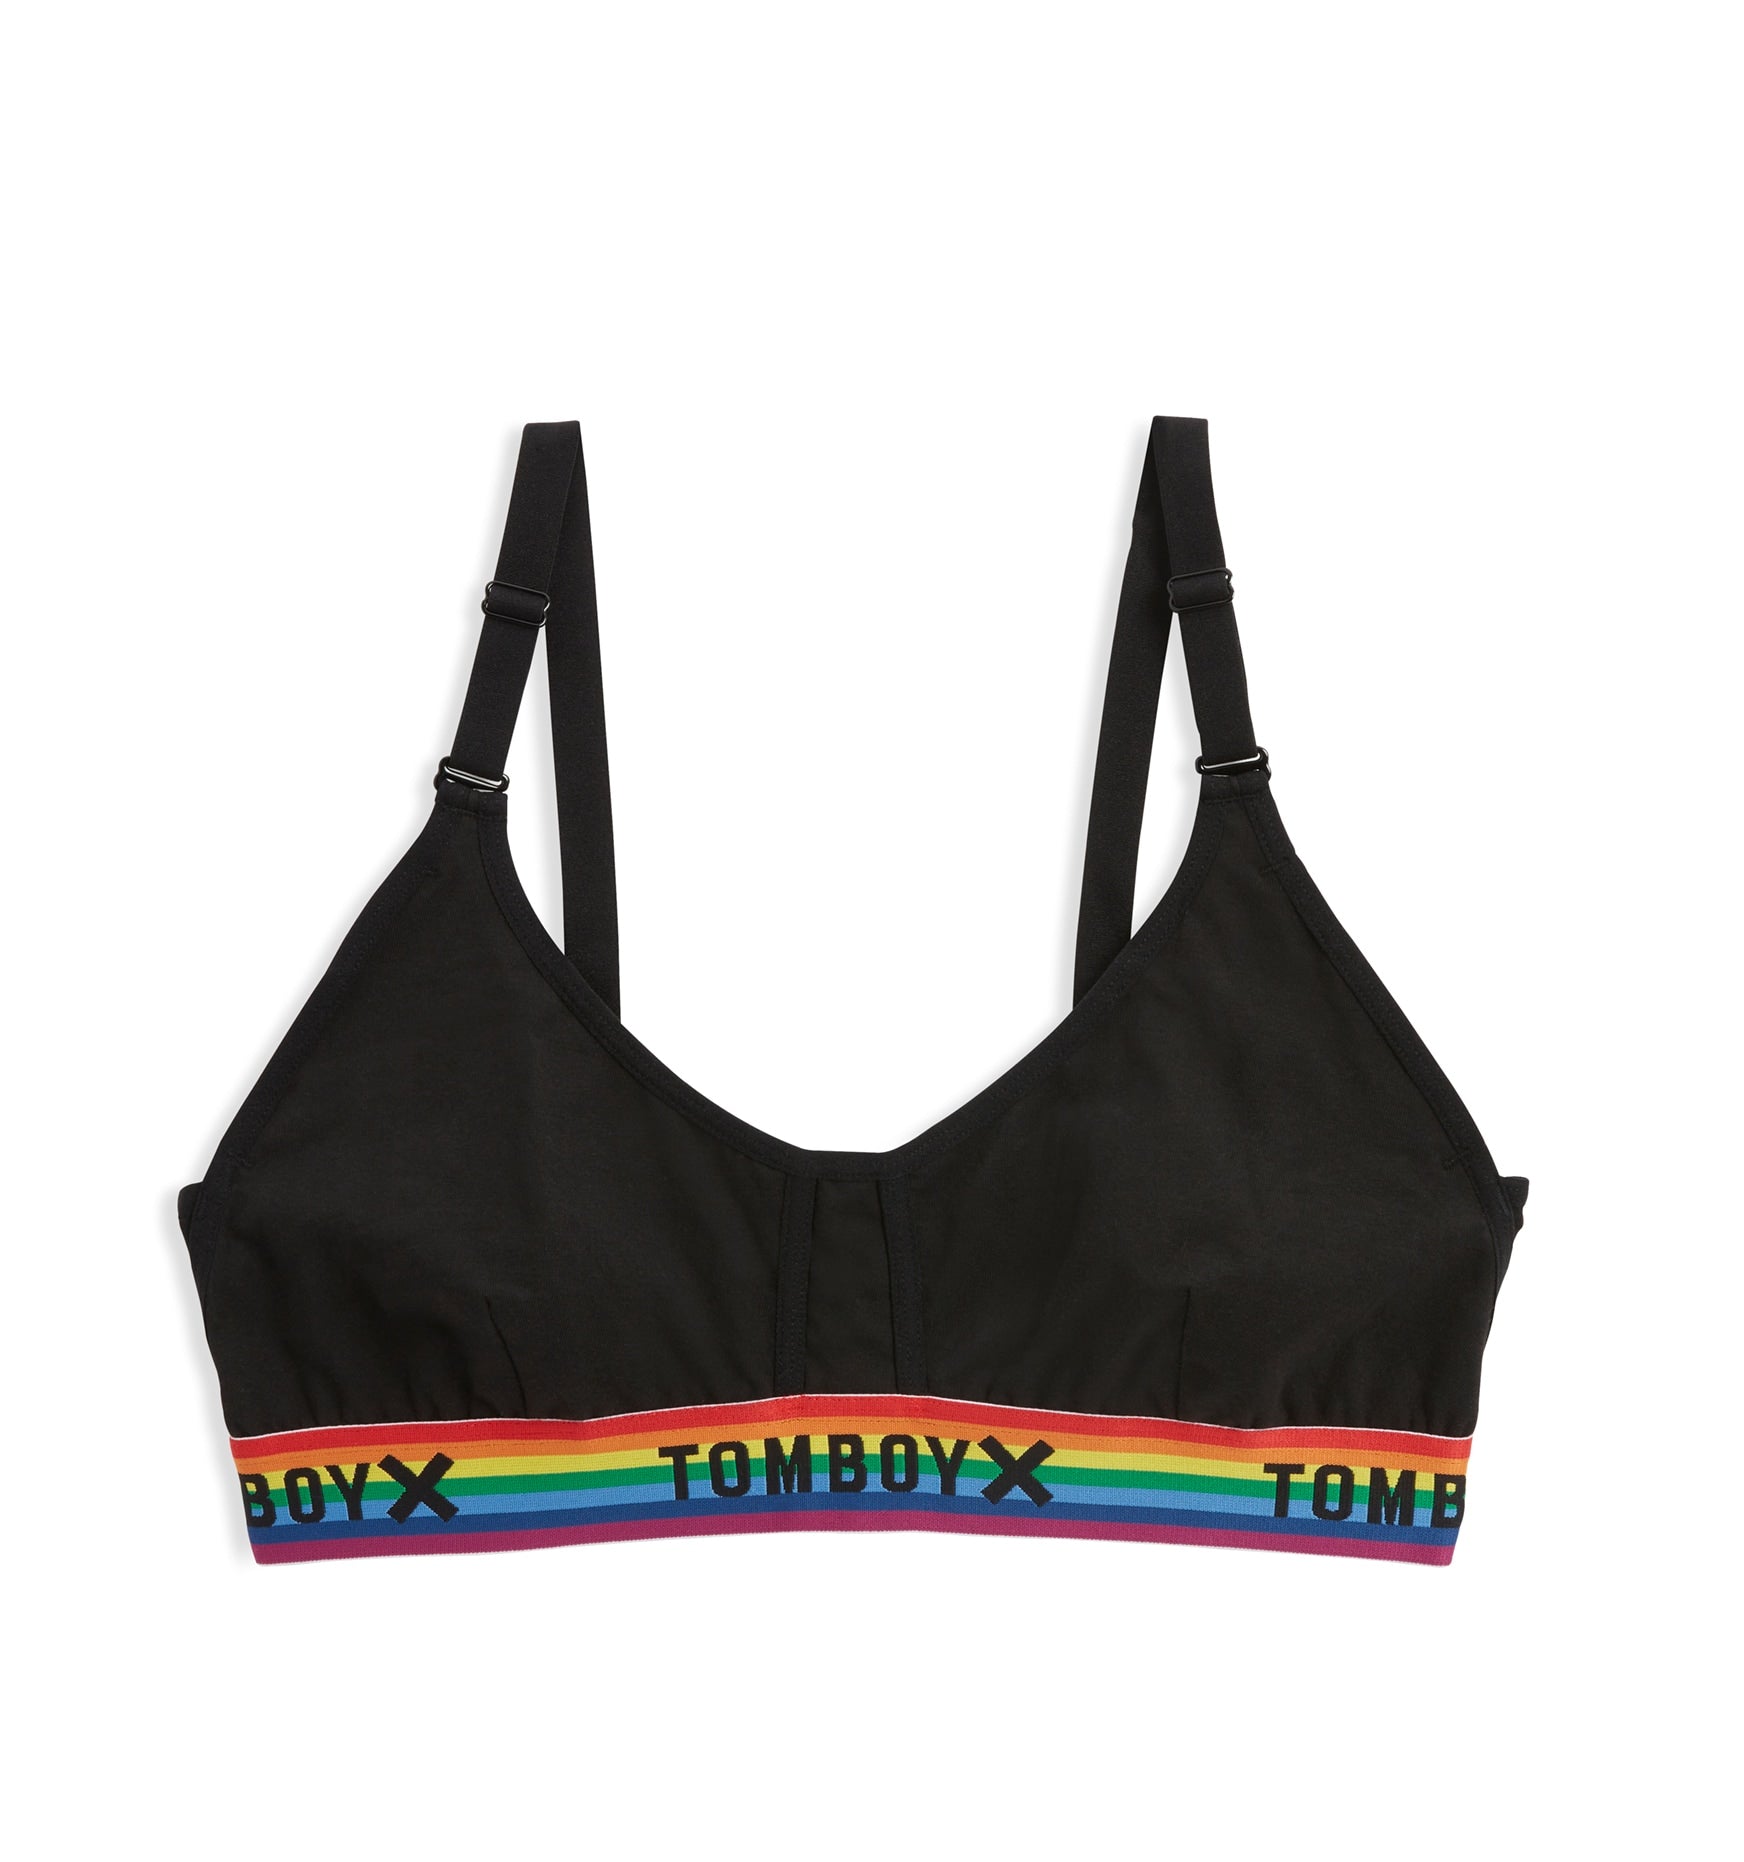 Tomboyx sports bra to the rescue!!! Finally figuring out how to keep the  34Gs in check without binding. I know these photos aren't the best, but can  anyone else see a difference